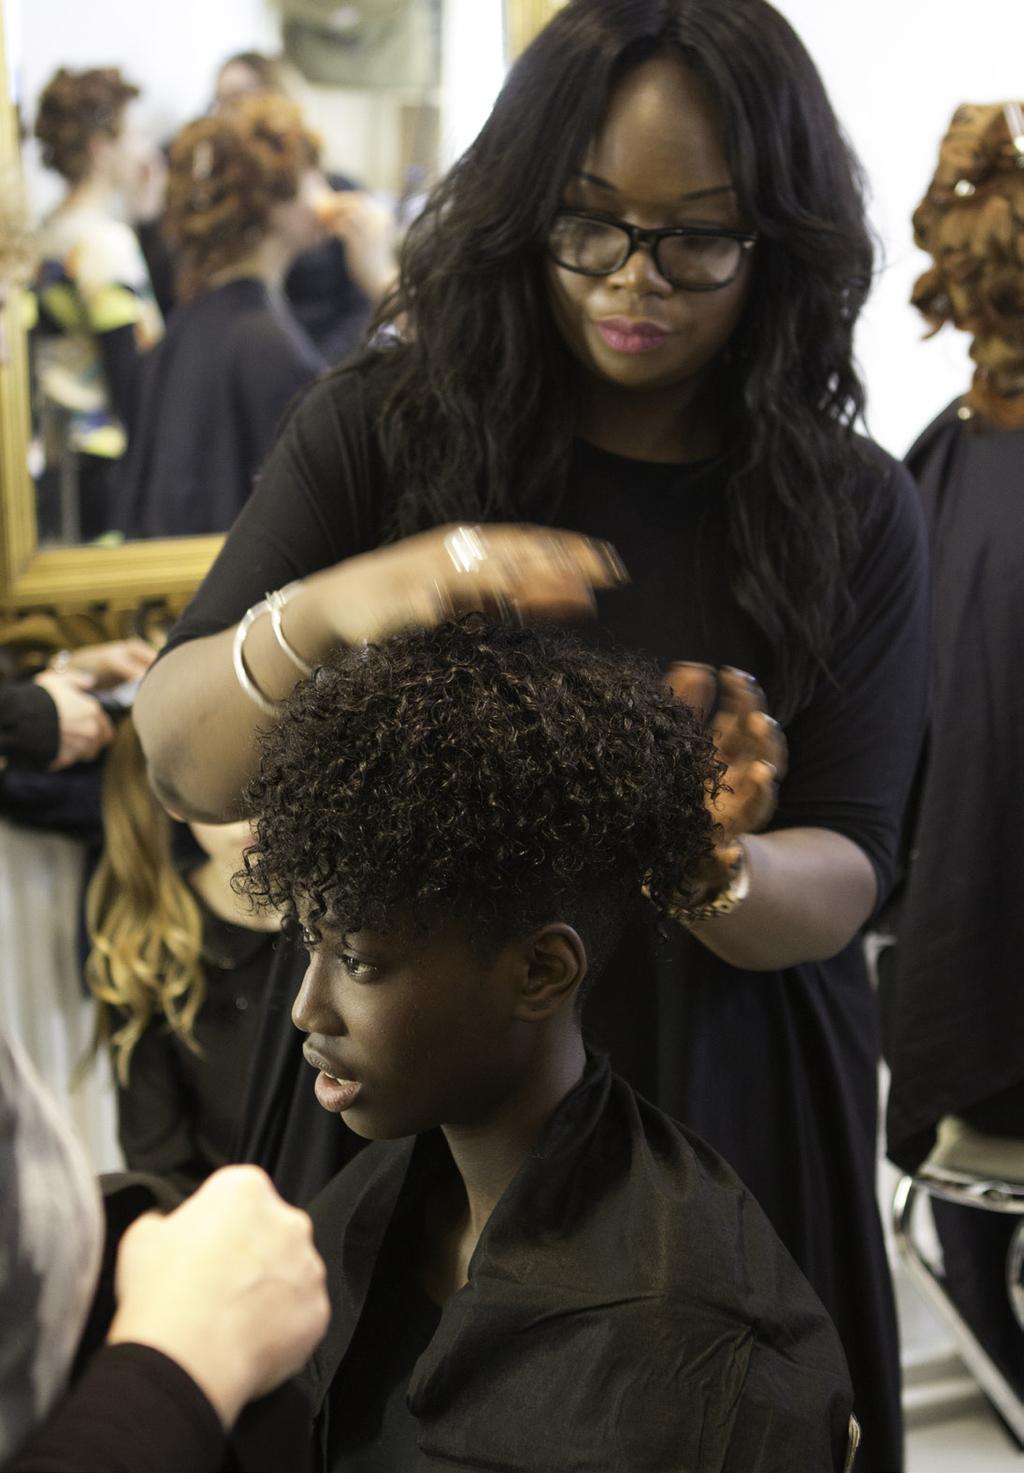 2. I am an educator - education to me is the backbone of the hairdressing industry.